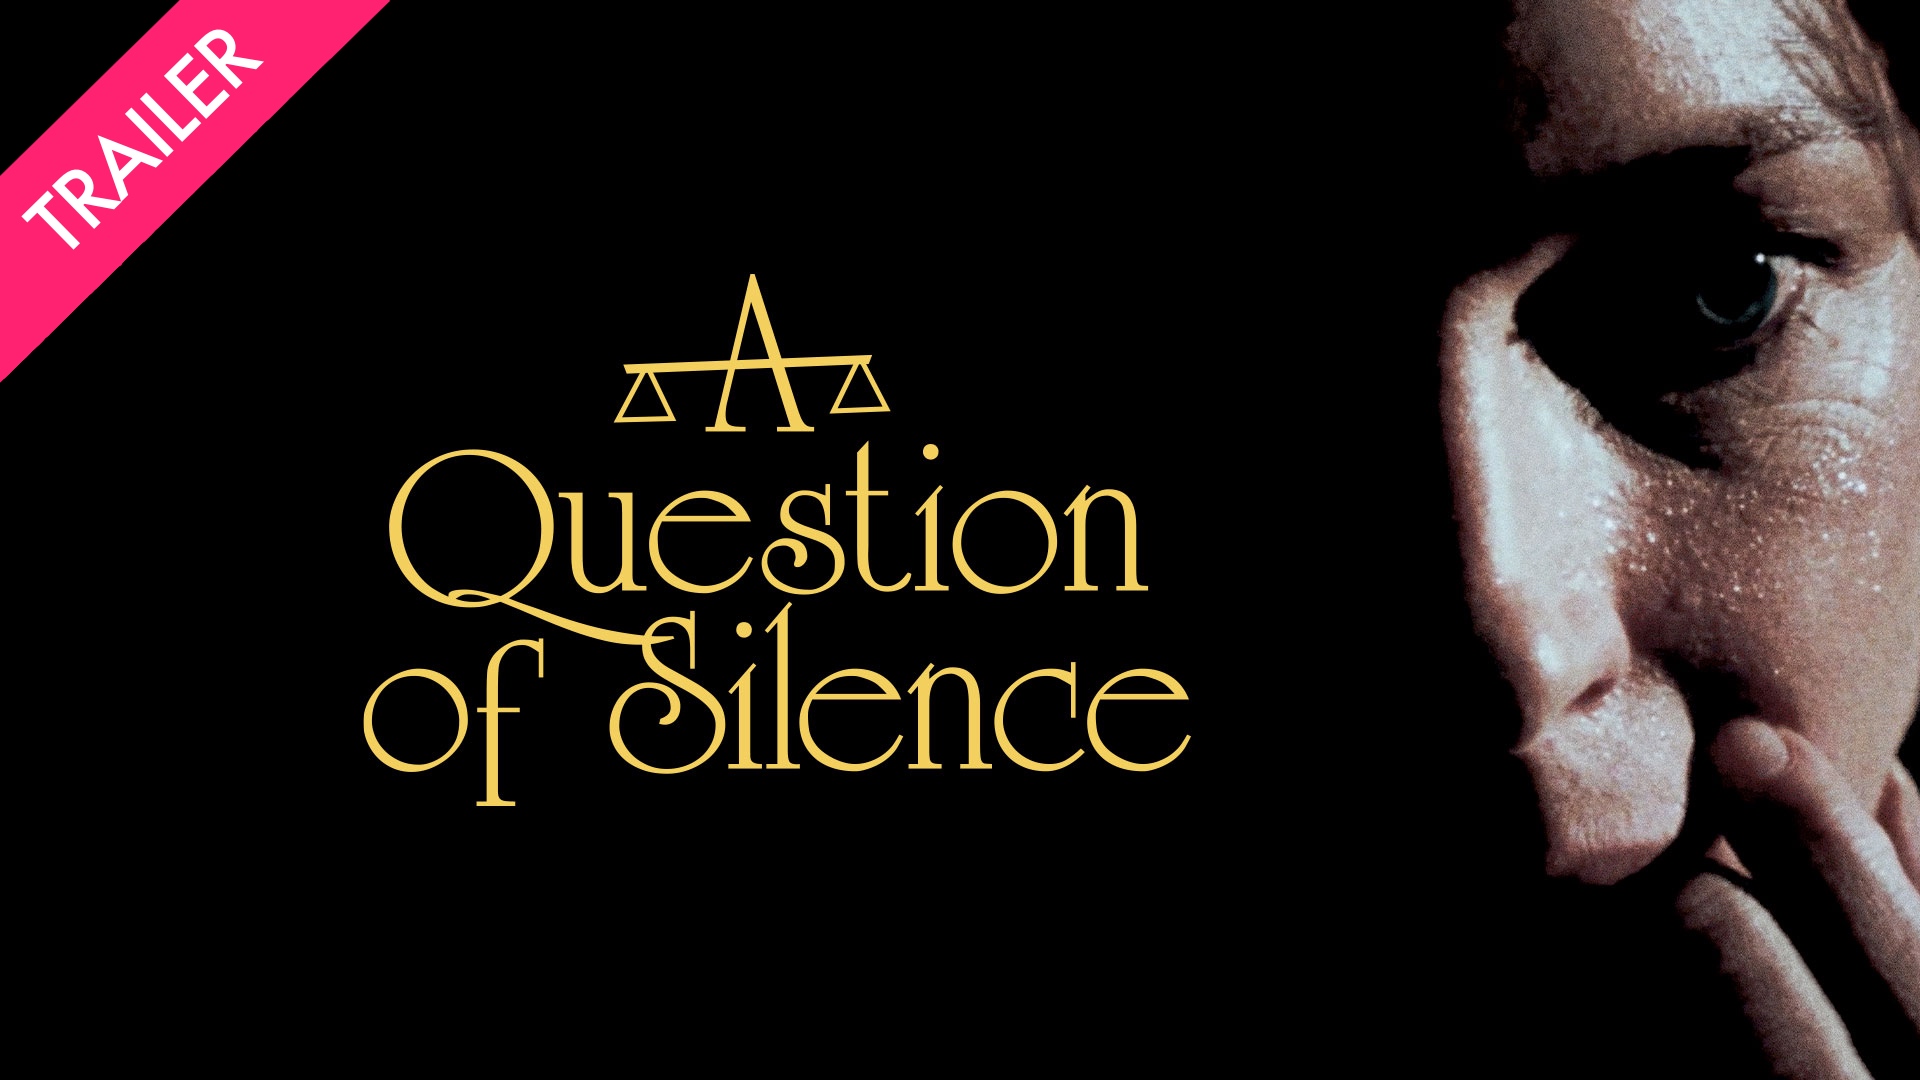 A Question of Silence